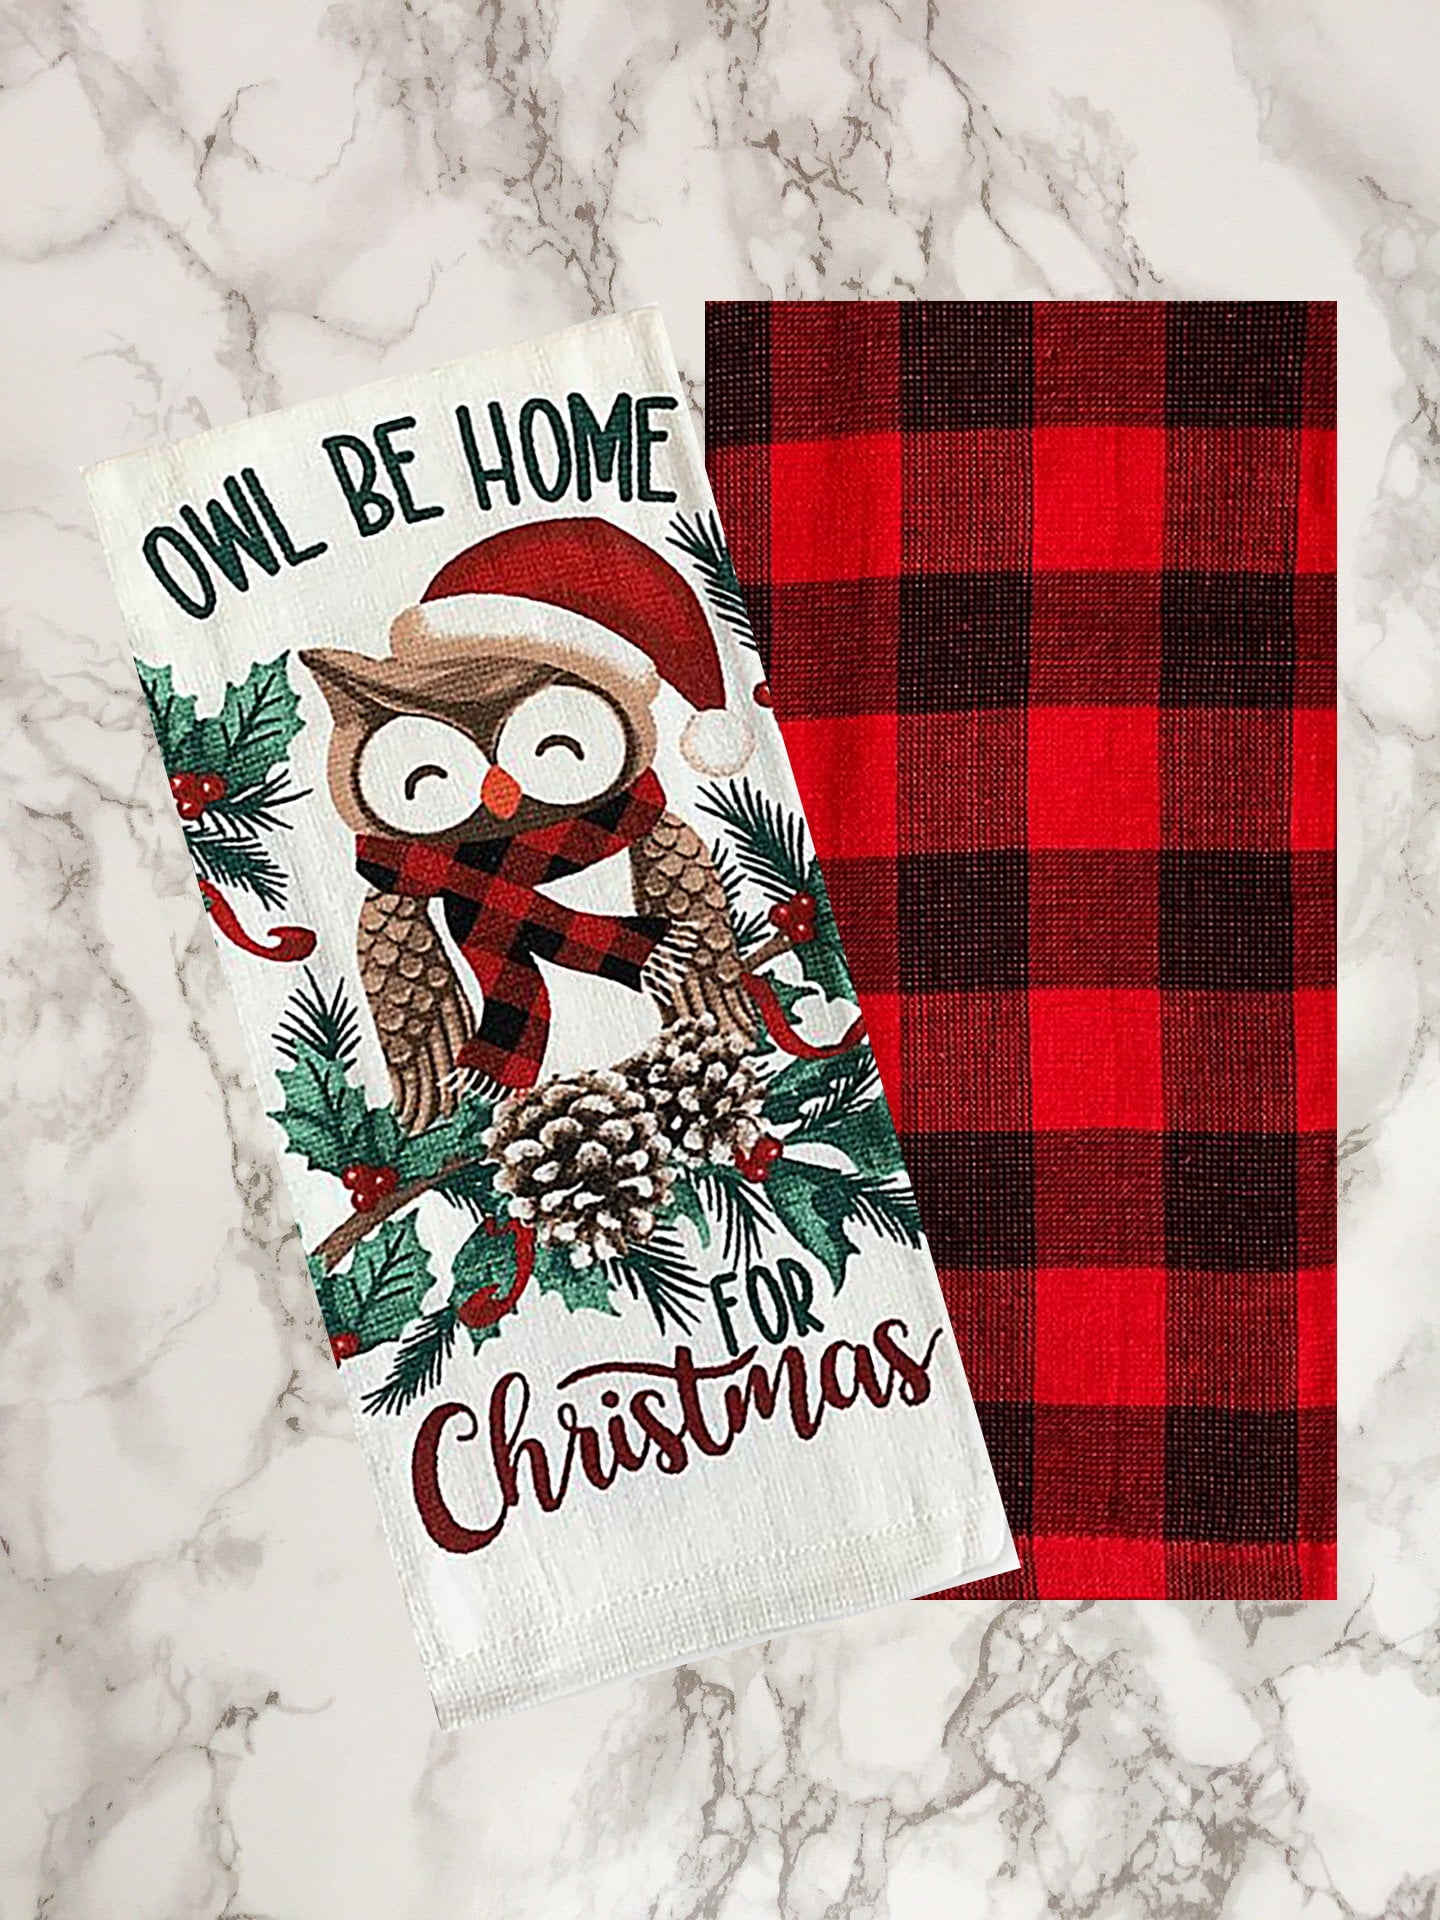 Christmas Cabin Plaid Kitchen Towel Set of 3 Cotton Holiday Winter